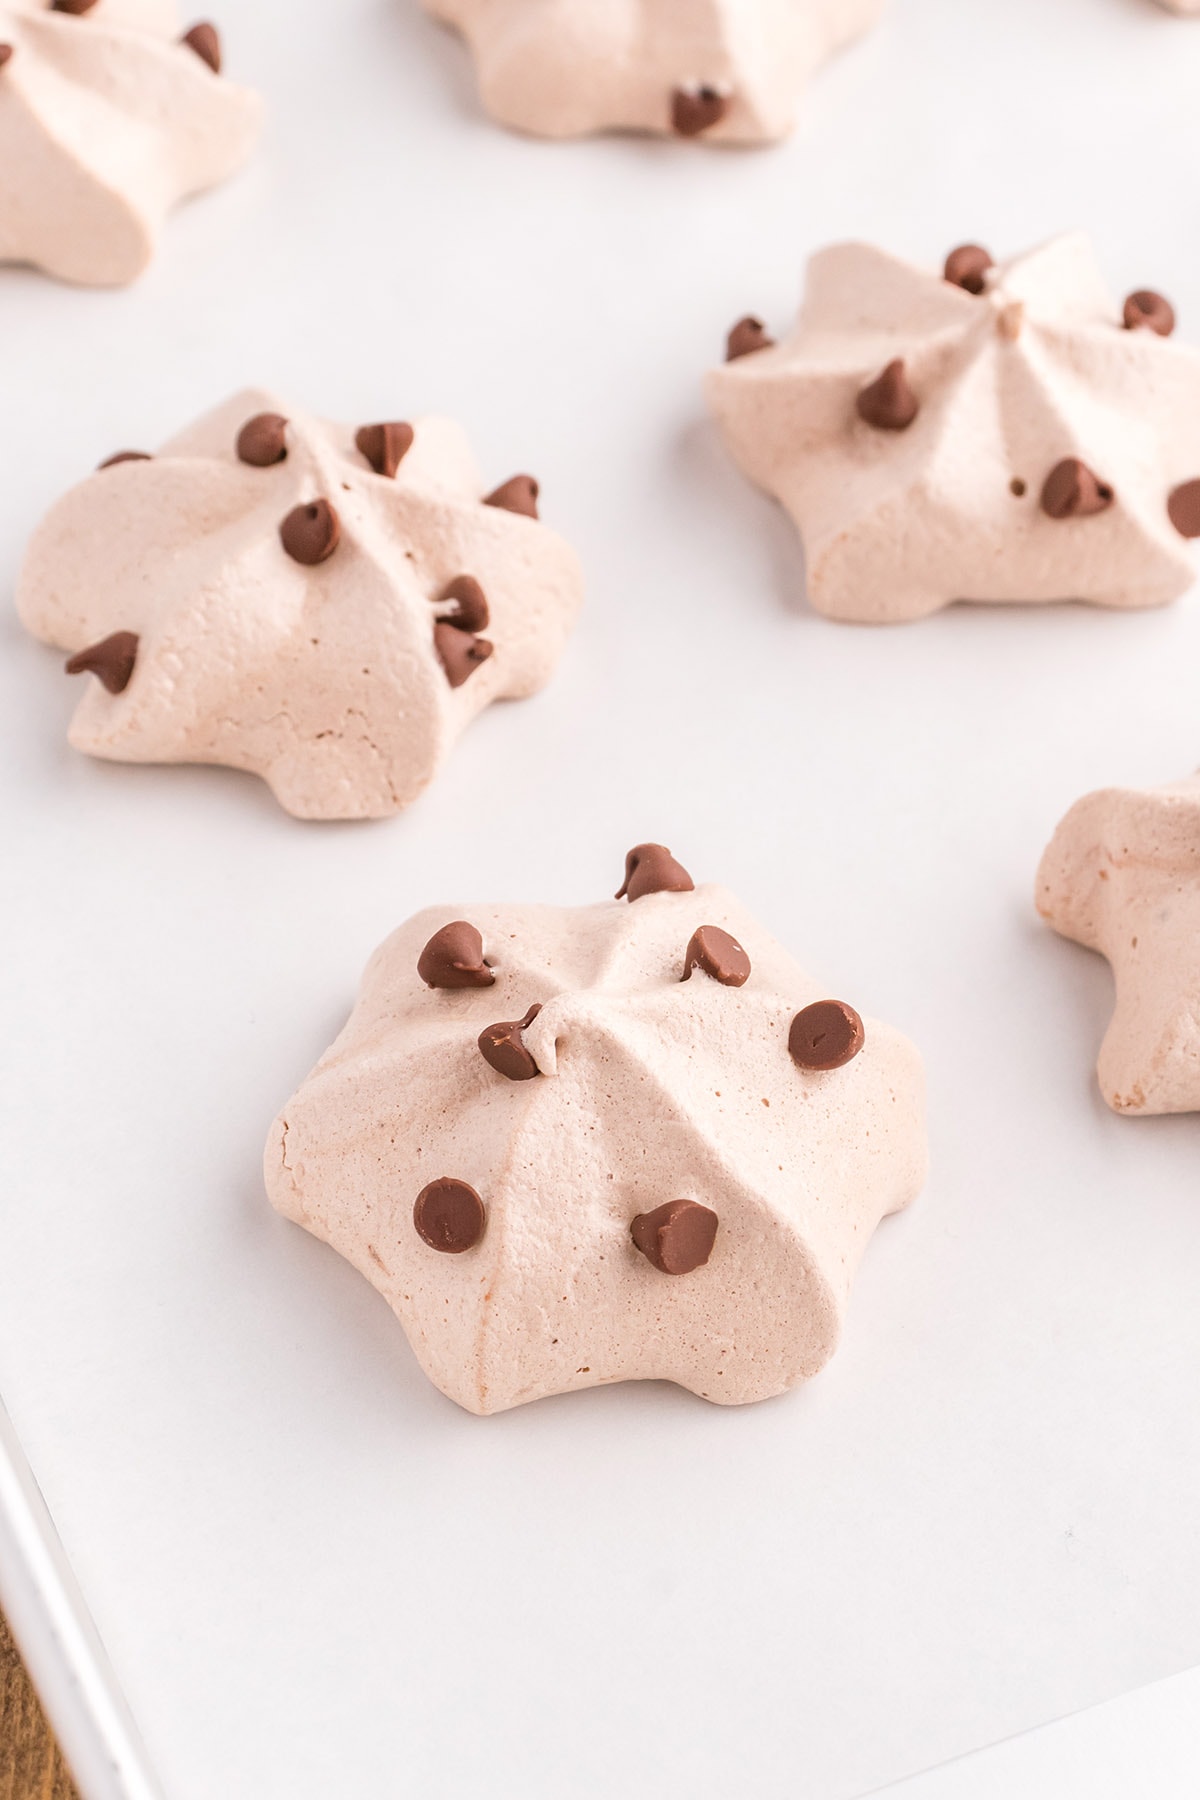 Double Chocolate Meringue Cookies with mini chocolate chips sprinkled